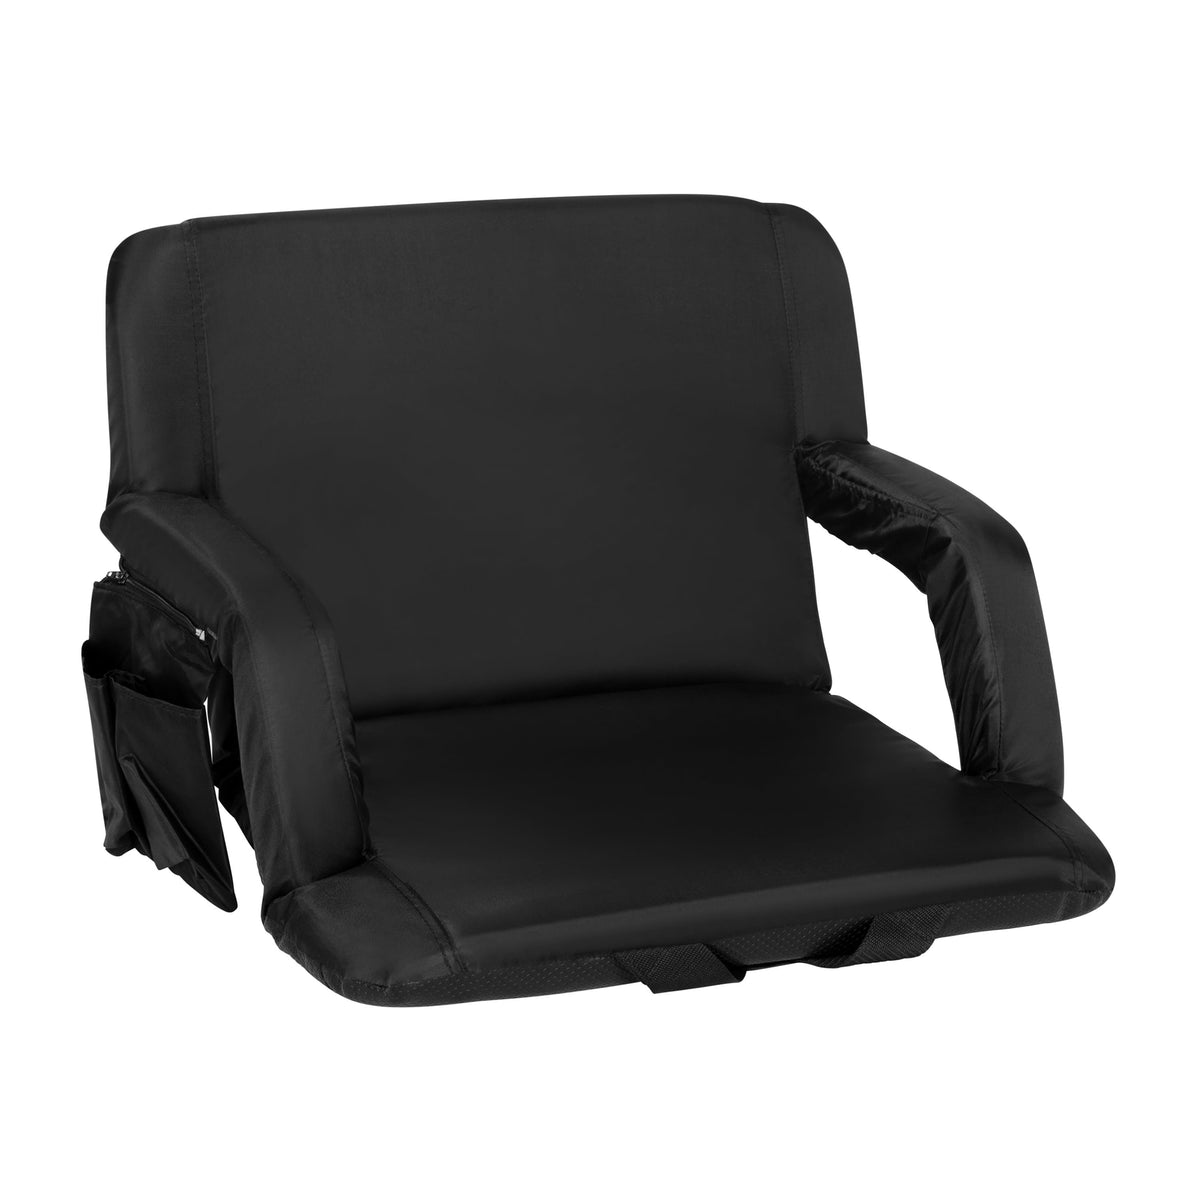 Black |#| Extra Wide Black Reclining Backpack Stadium Chair with Armrests & Storge Pockets